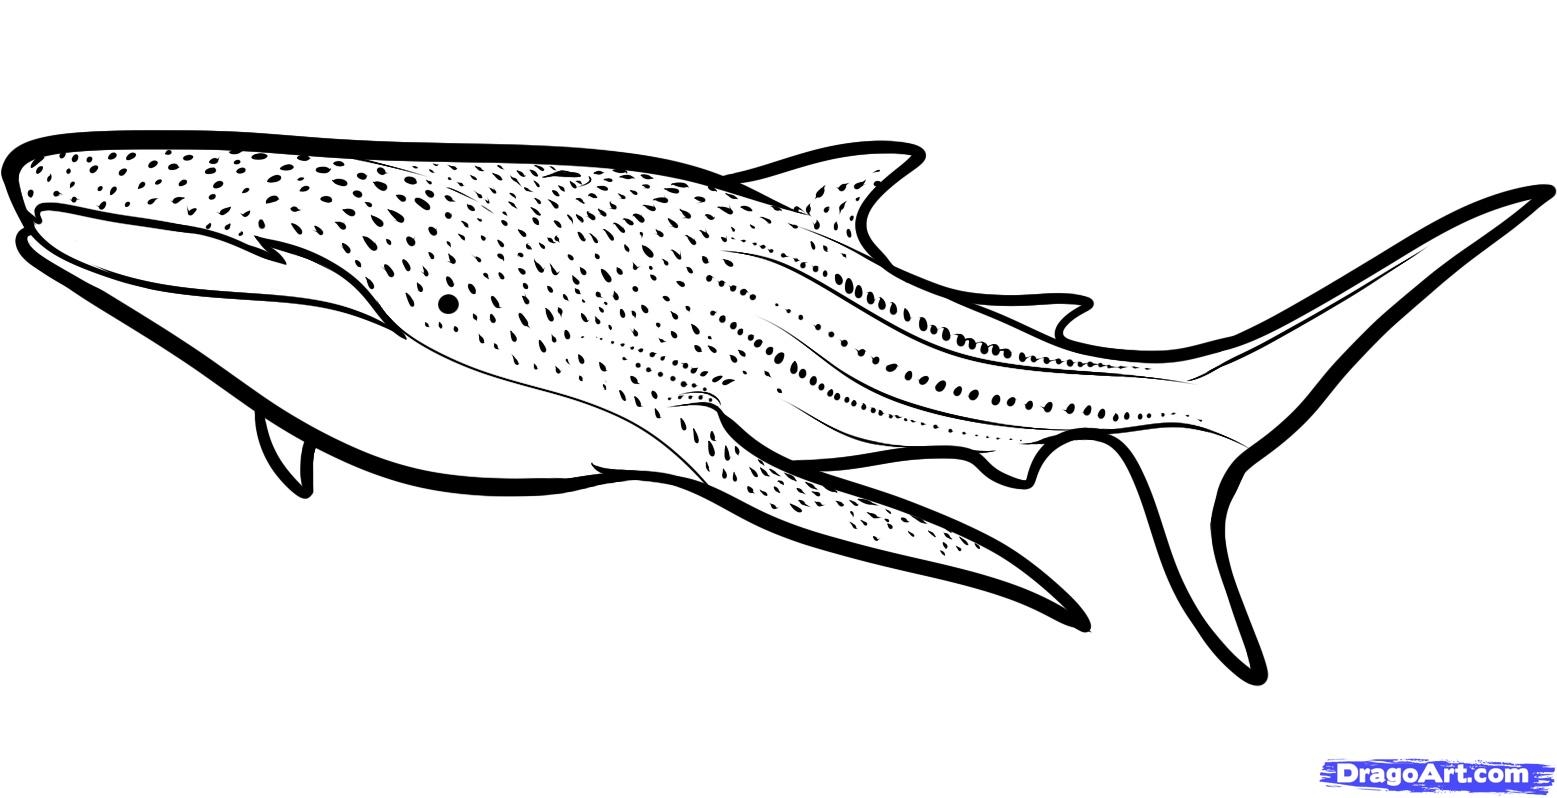 Whale shark clipart black and white.